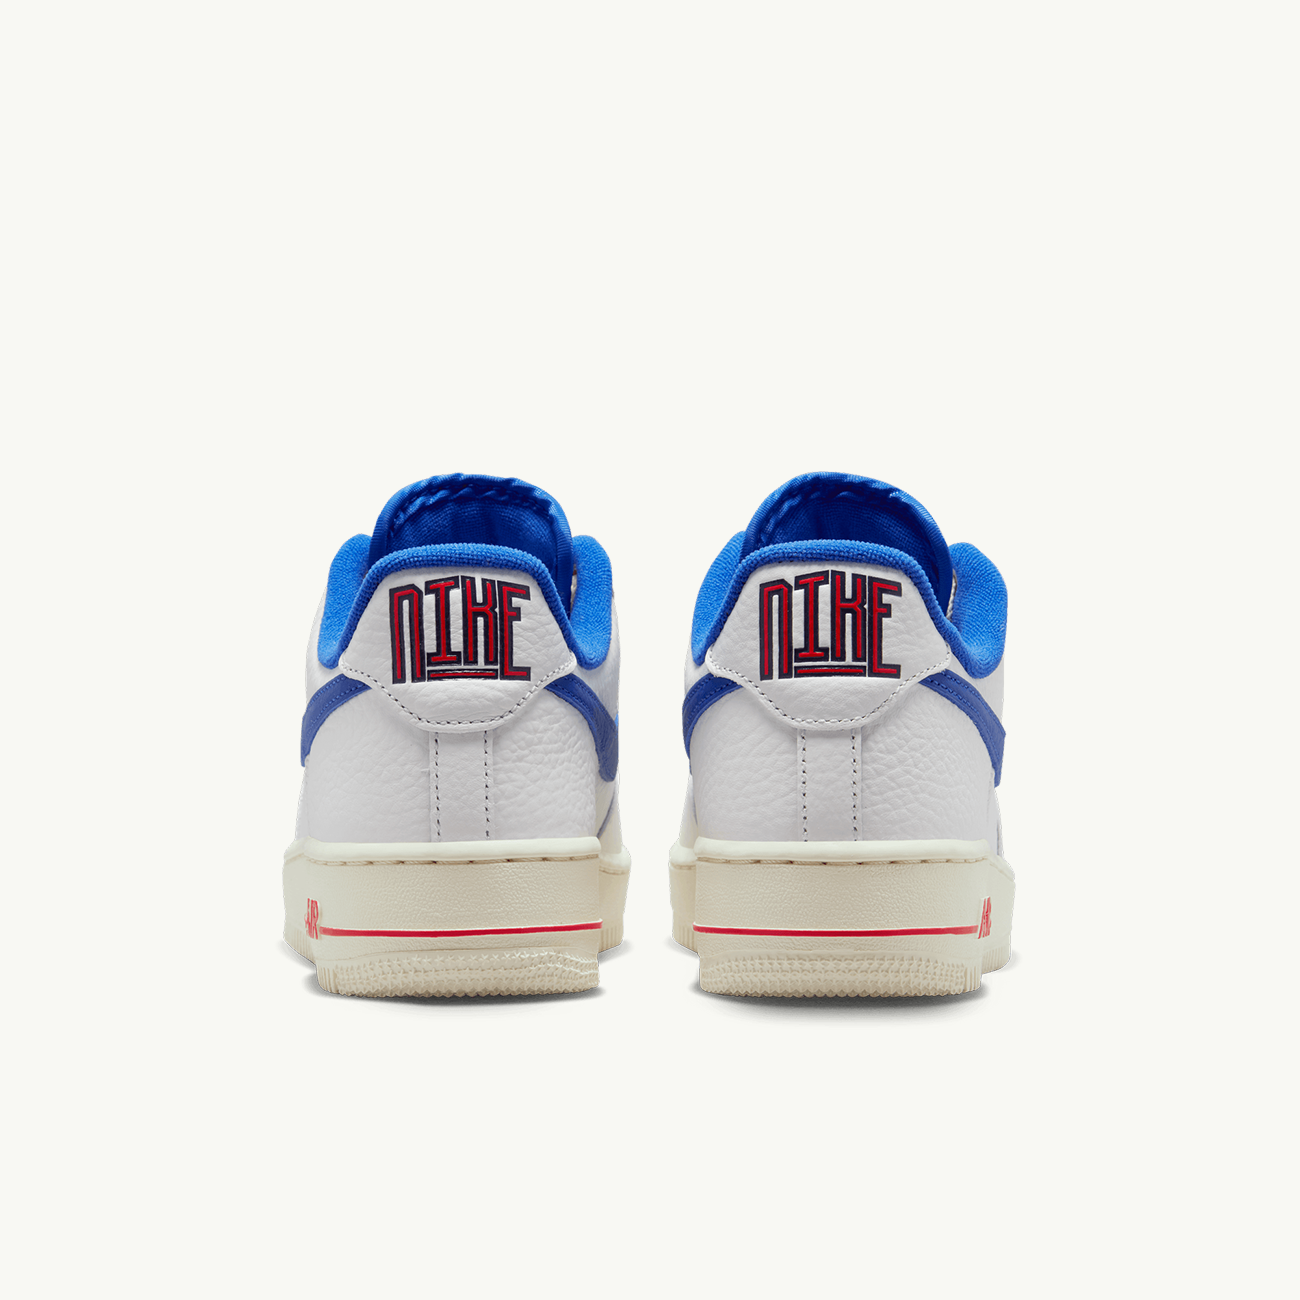 Women's Air Force 1 07 Lux - Summit White/Hyper Royal